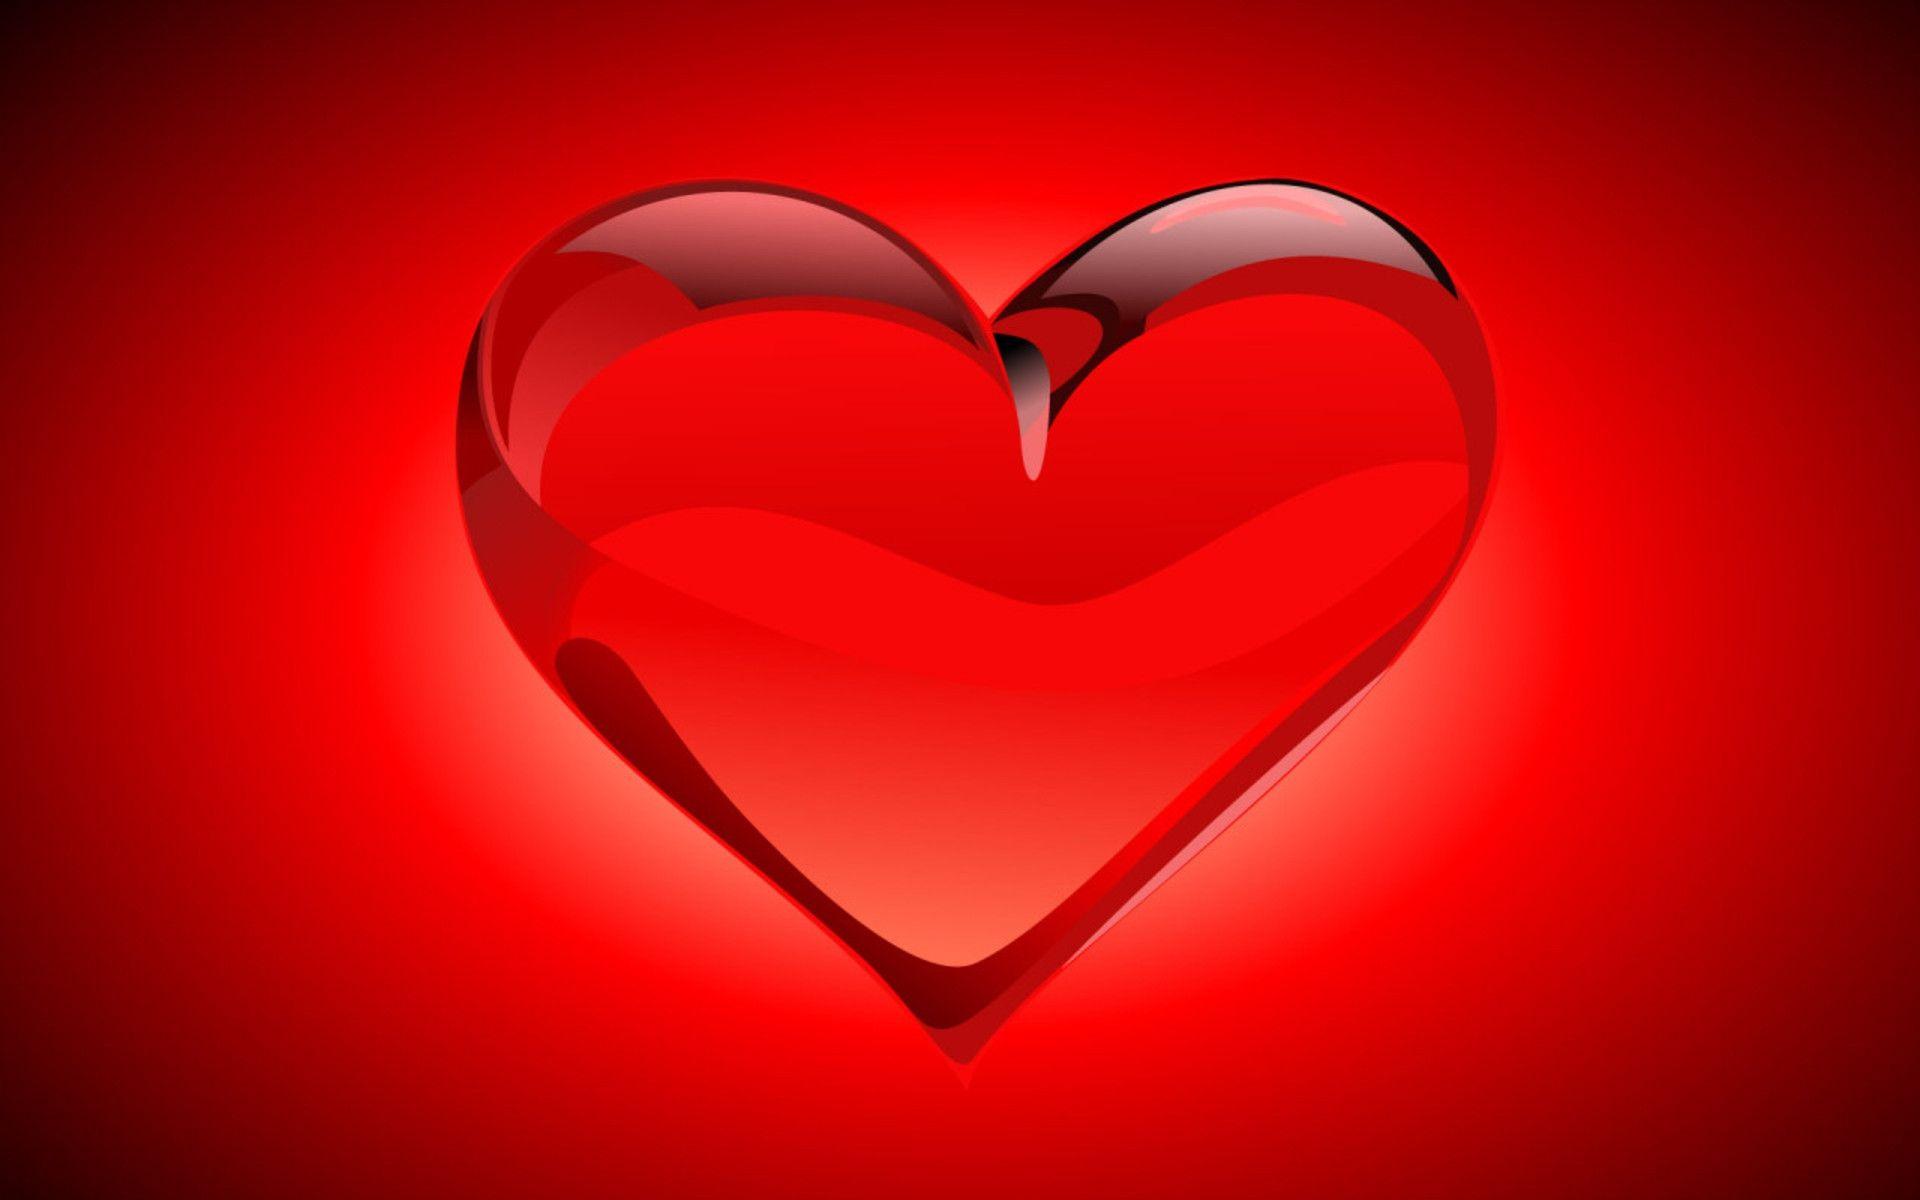 The Red Heart Of Love Free Picture